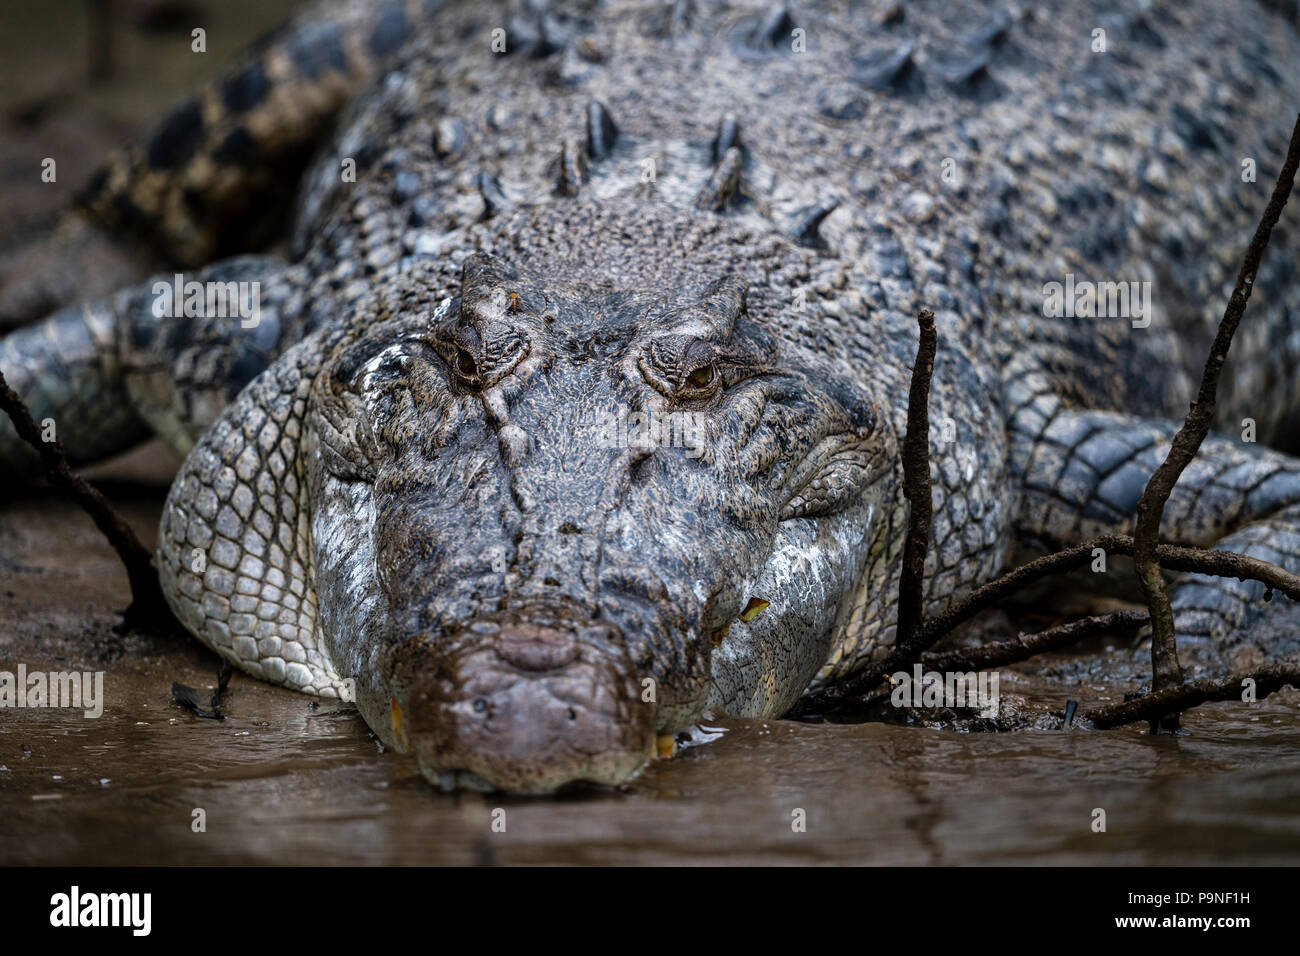 A Saltwater Crocodile basking on a river bank to thermoregulate it's body temperature. Stock Photo